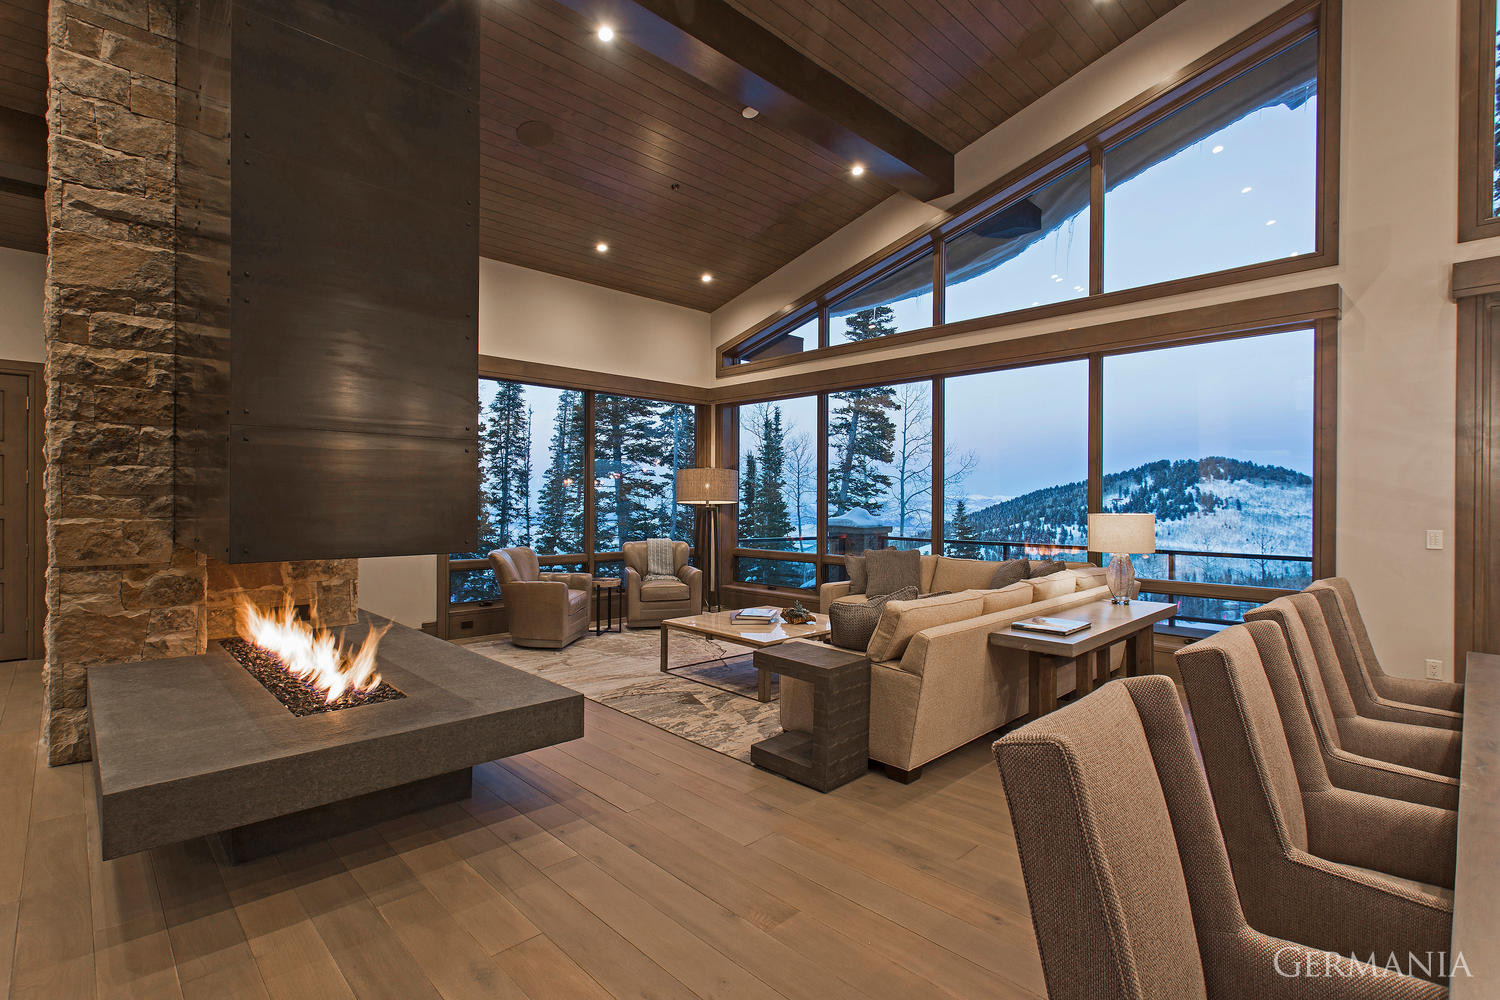 When building your custom luxury home dining room, consider all the parts to maximize your mountain living experience. Fireplace and tongue and groove ceilings can augment any view!